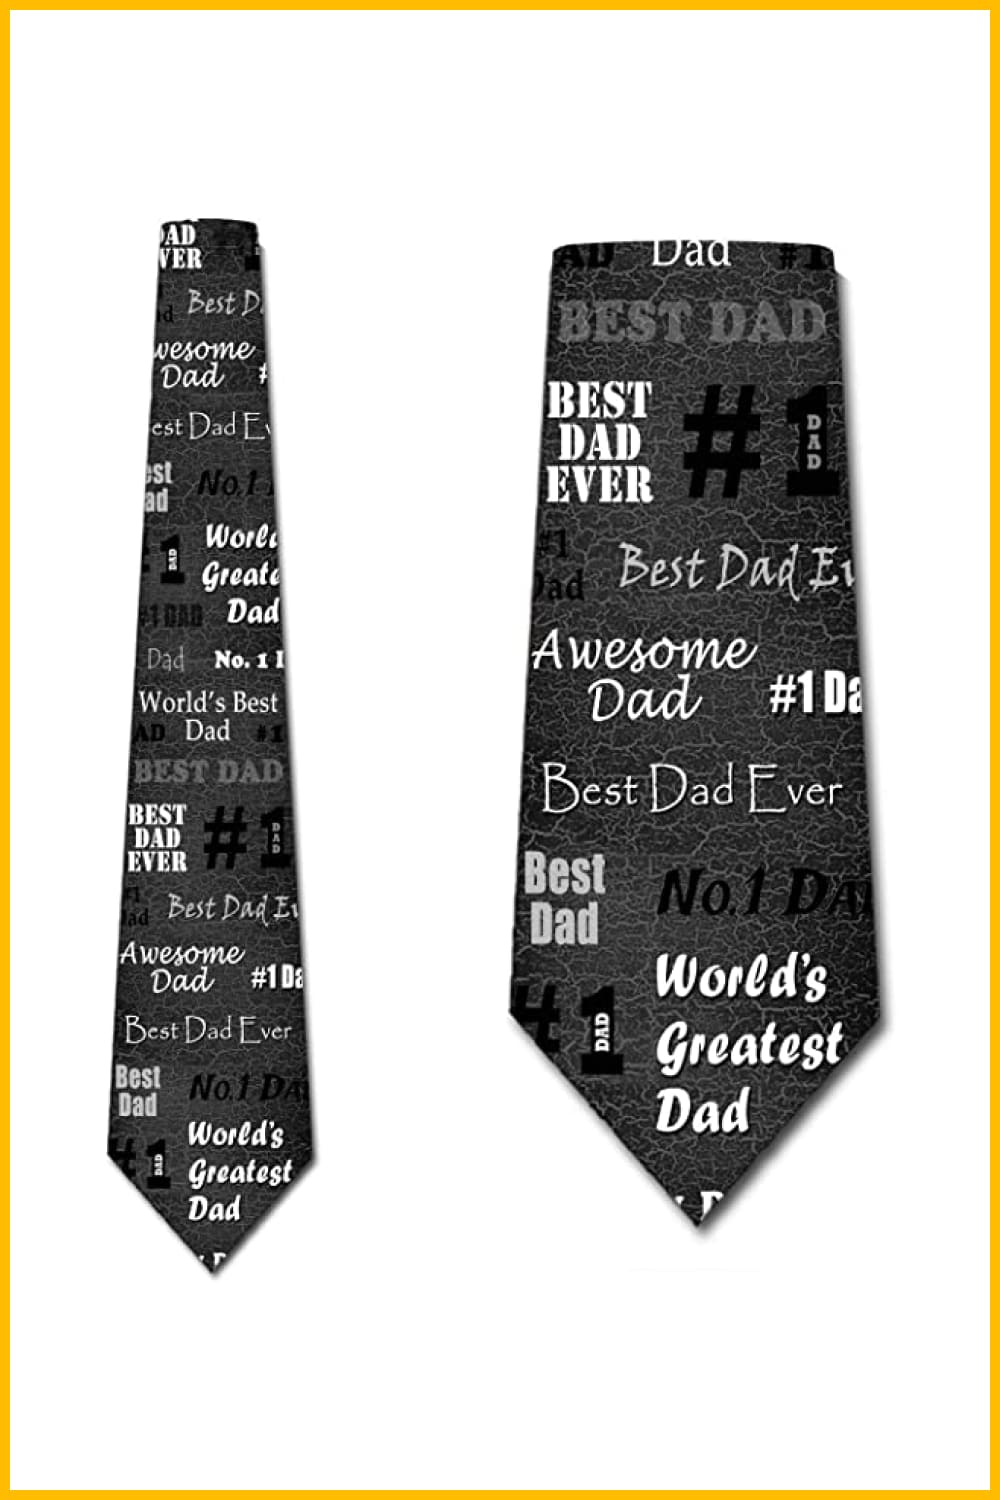 Gray tie with Father's Day slogans.